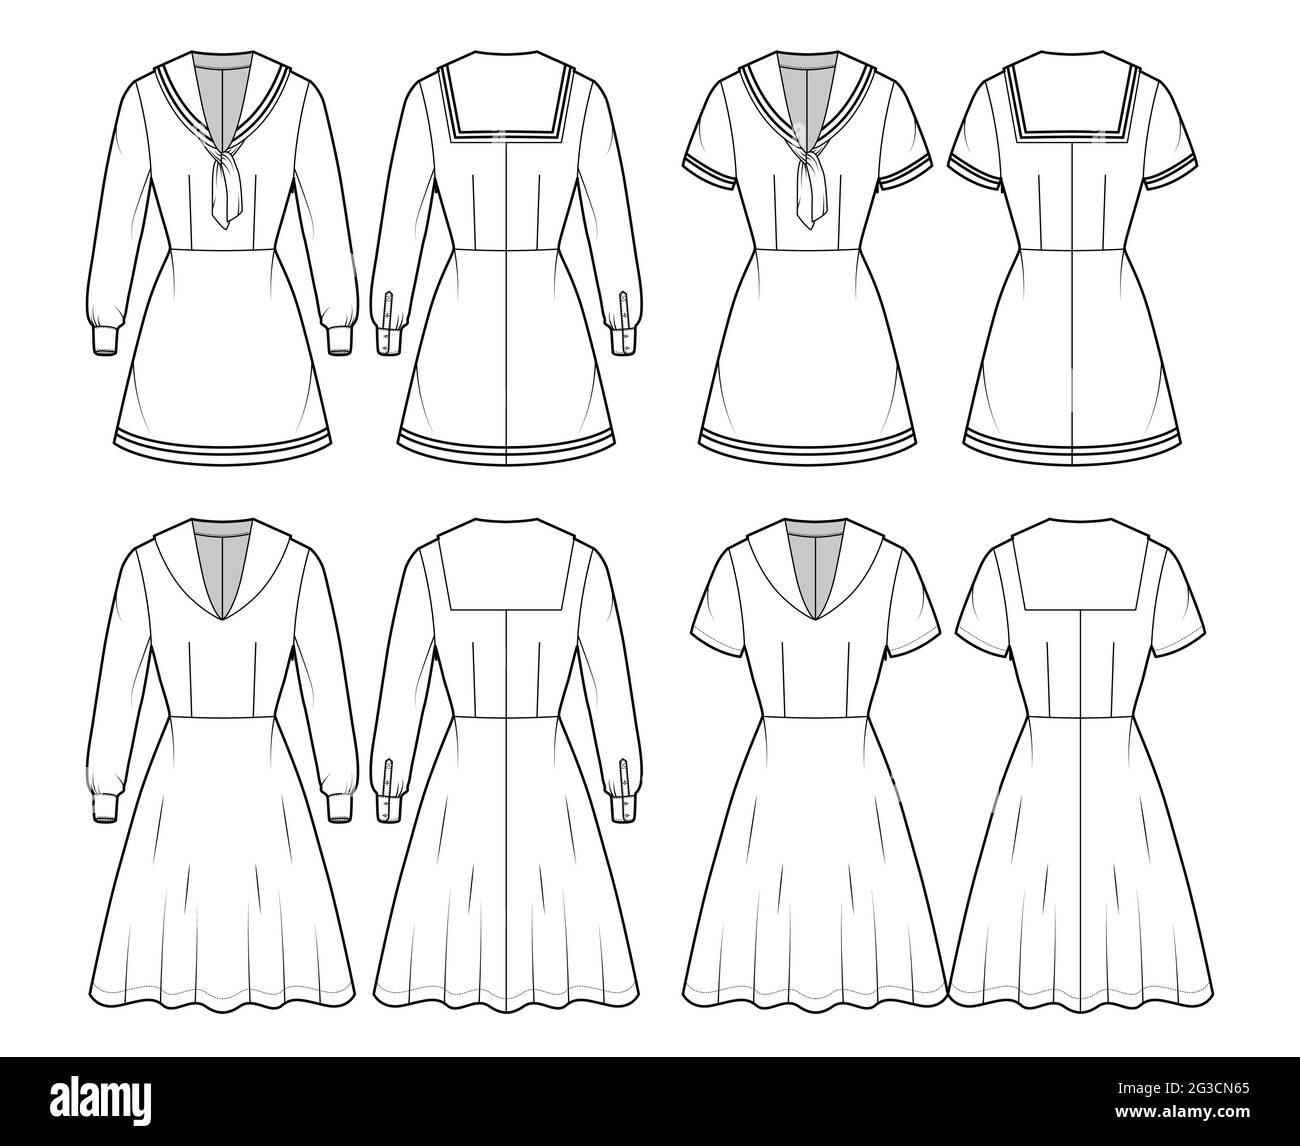 Sailor dresses Stock Vector Images - Alamy